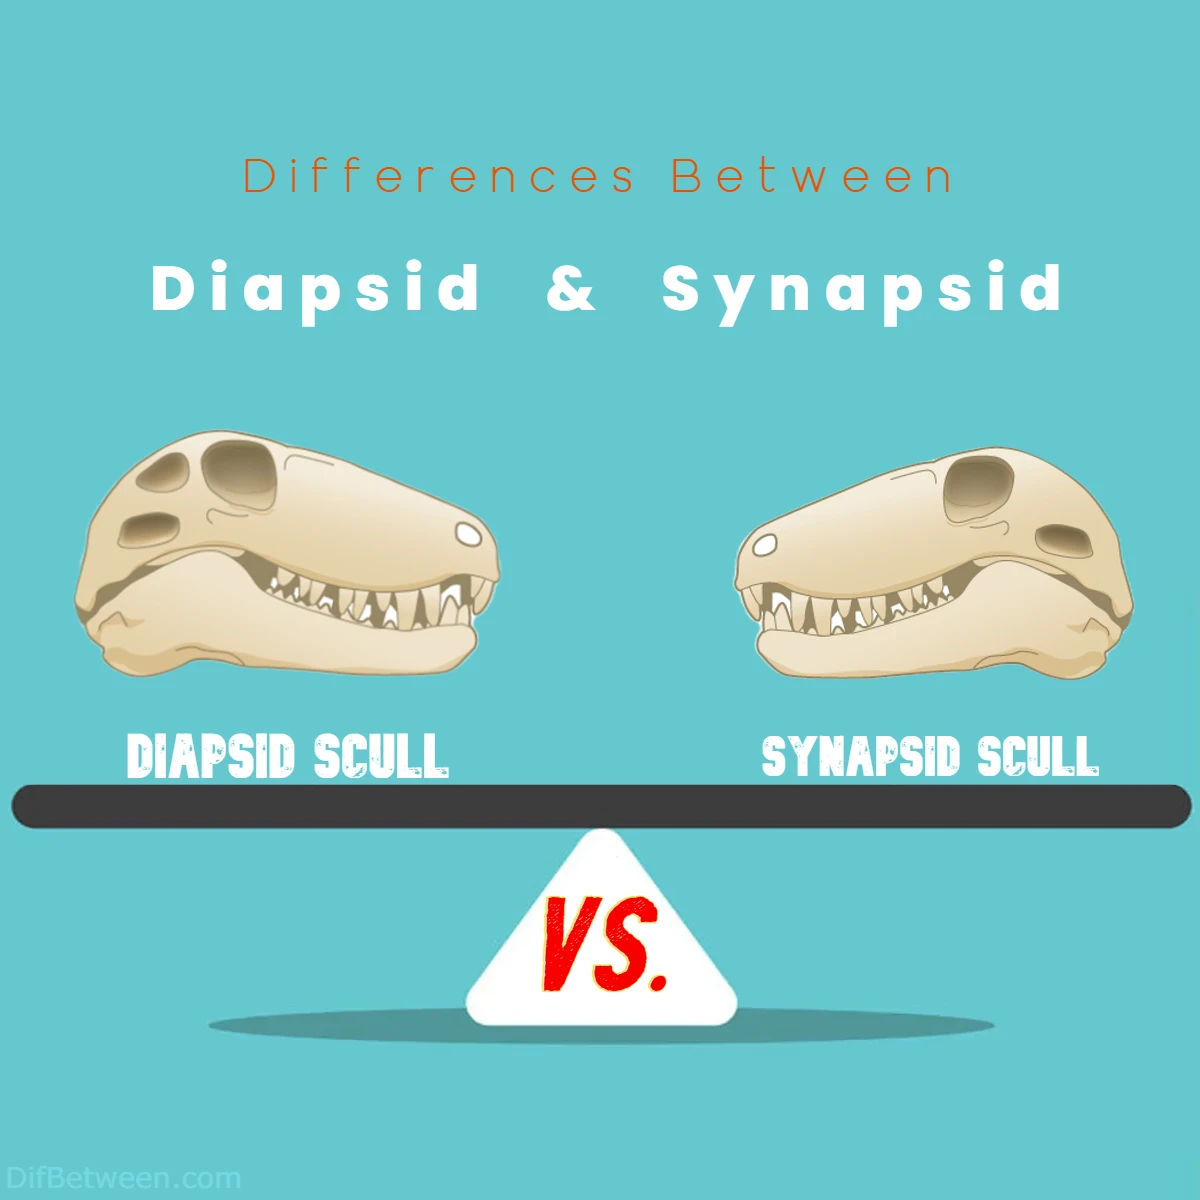 Differences Between Diapsid vs Synapsid